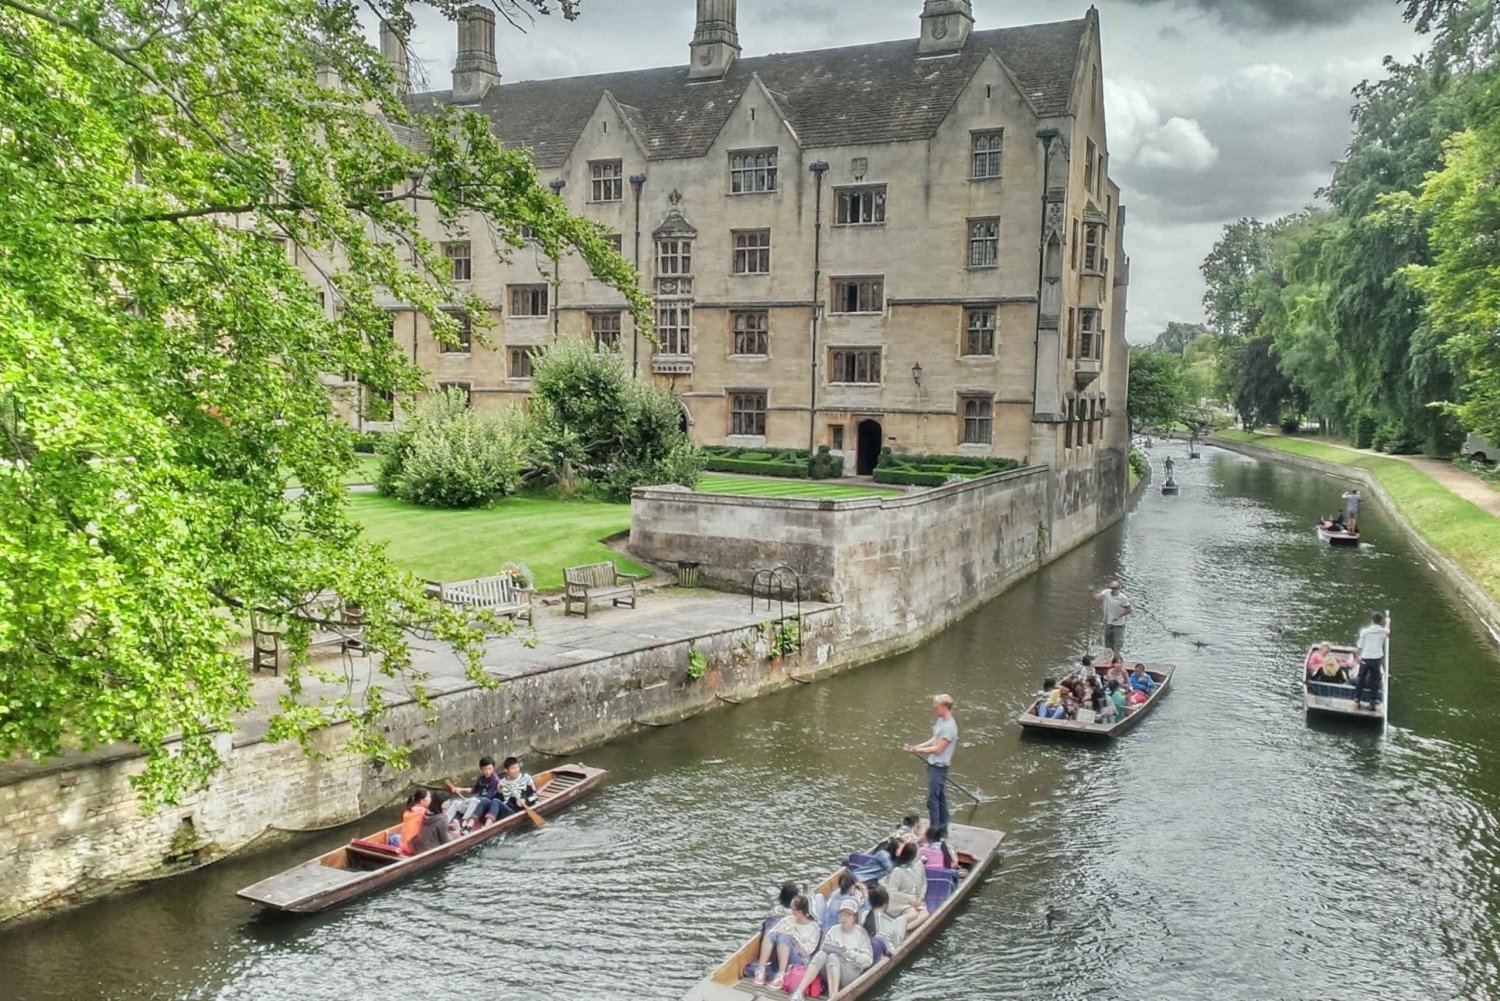 From London: Full-Day Tour to Oxford and Cambridge